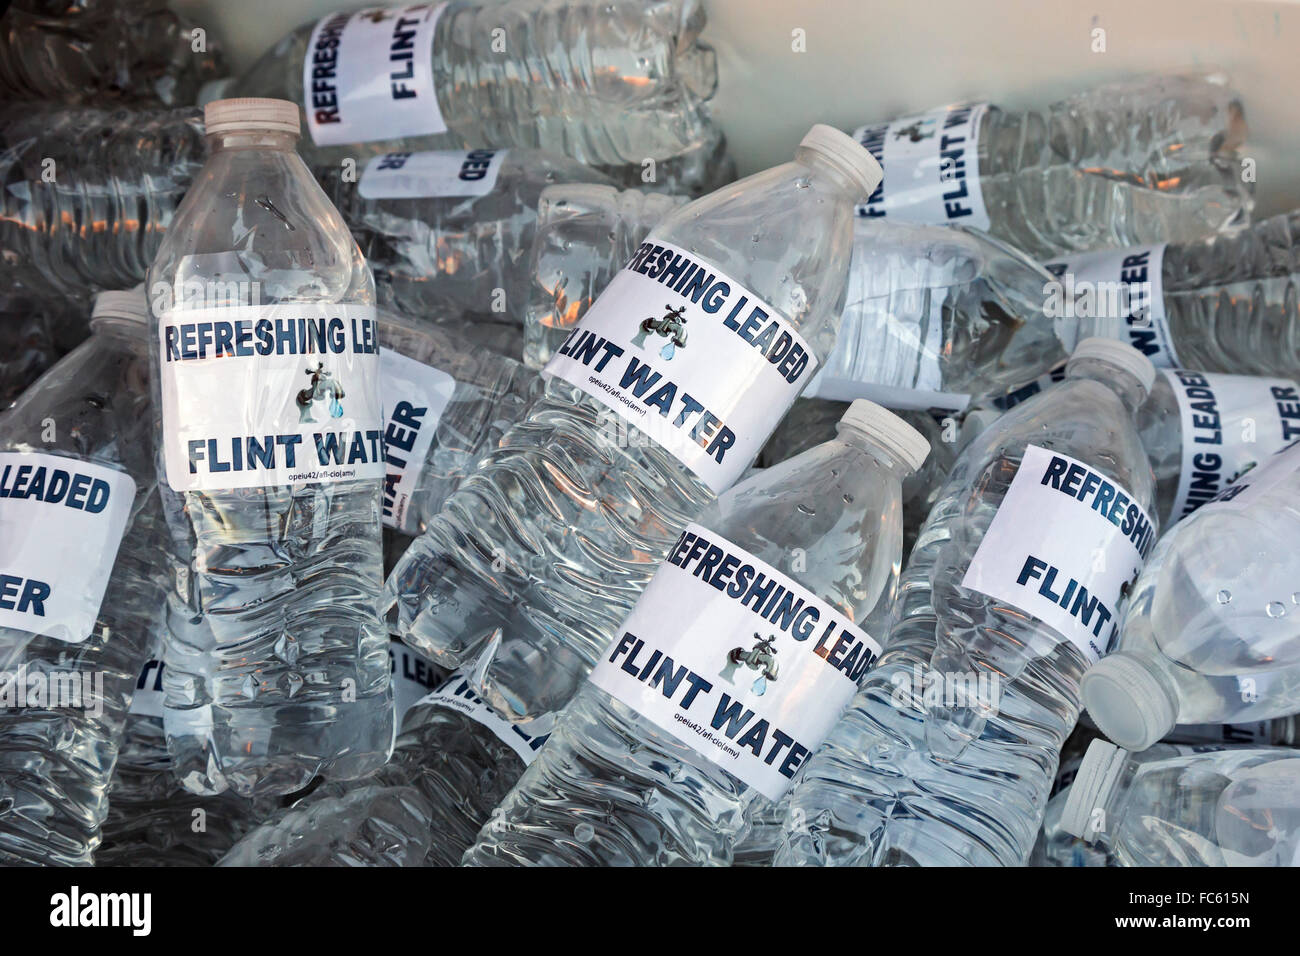 Lansing, Michigan - Protesters place a cooler full of 'refreshing leaded Flint water' on the capitol steps for state legislators Stock Photo